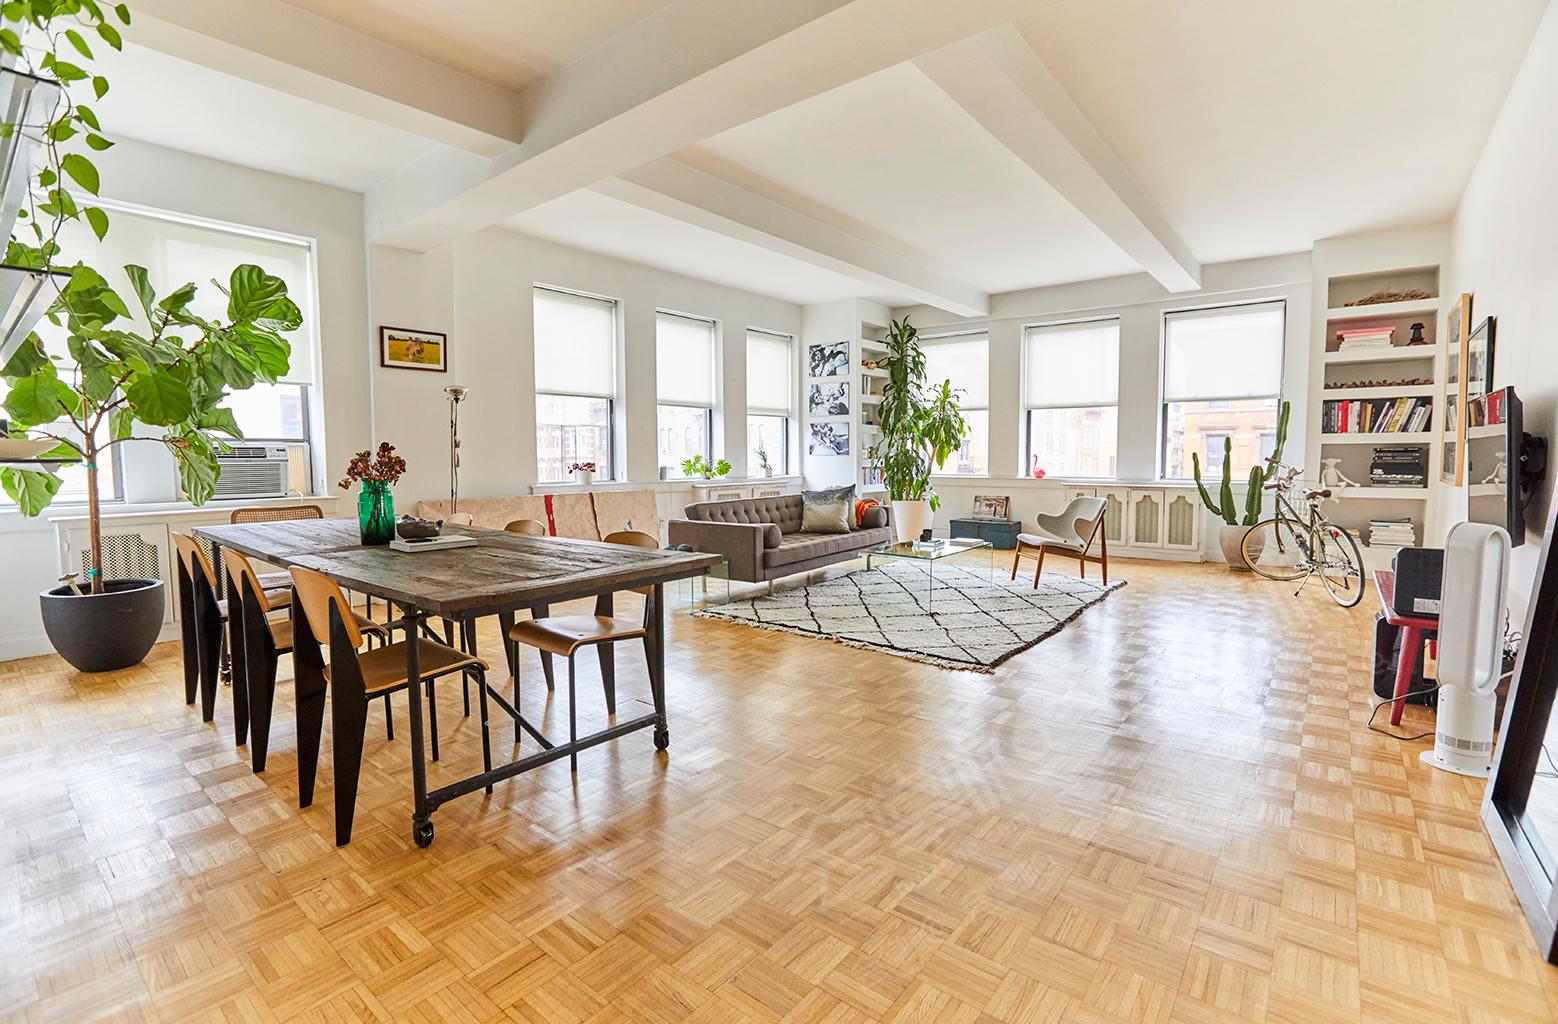 Sun-drenched 2,000 sq./ft. minimalist loft in East Village with high functionality